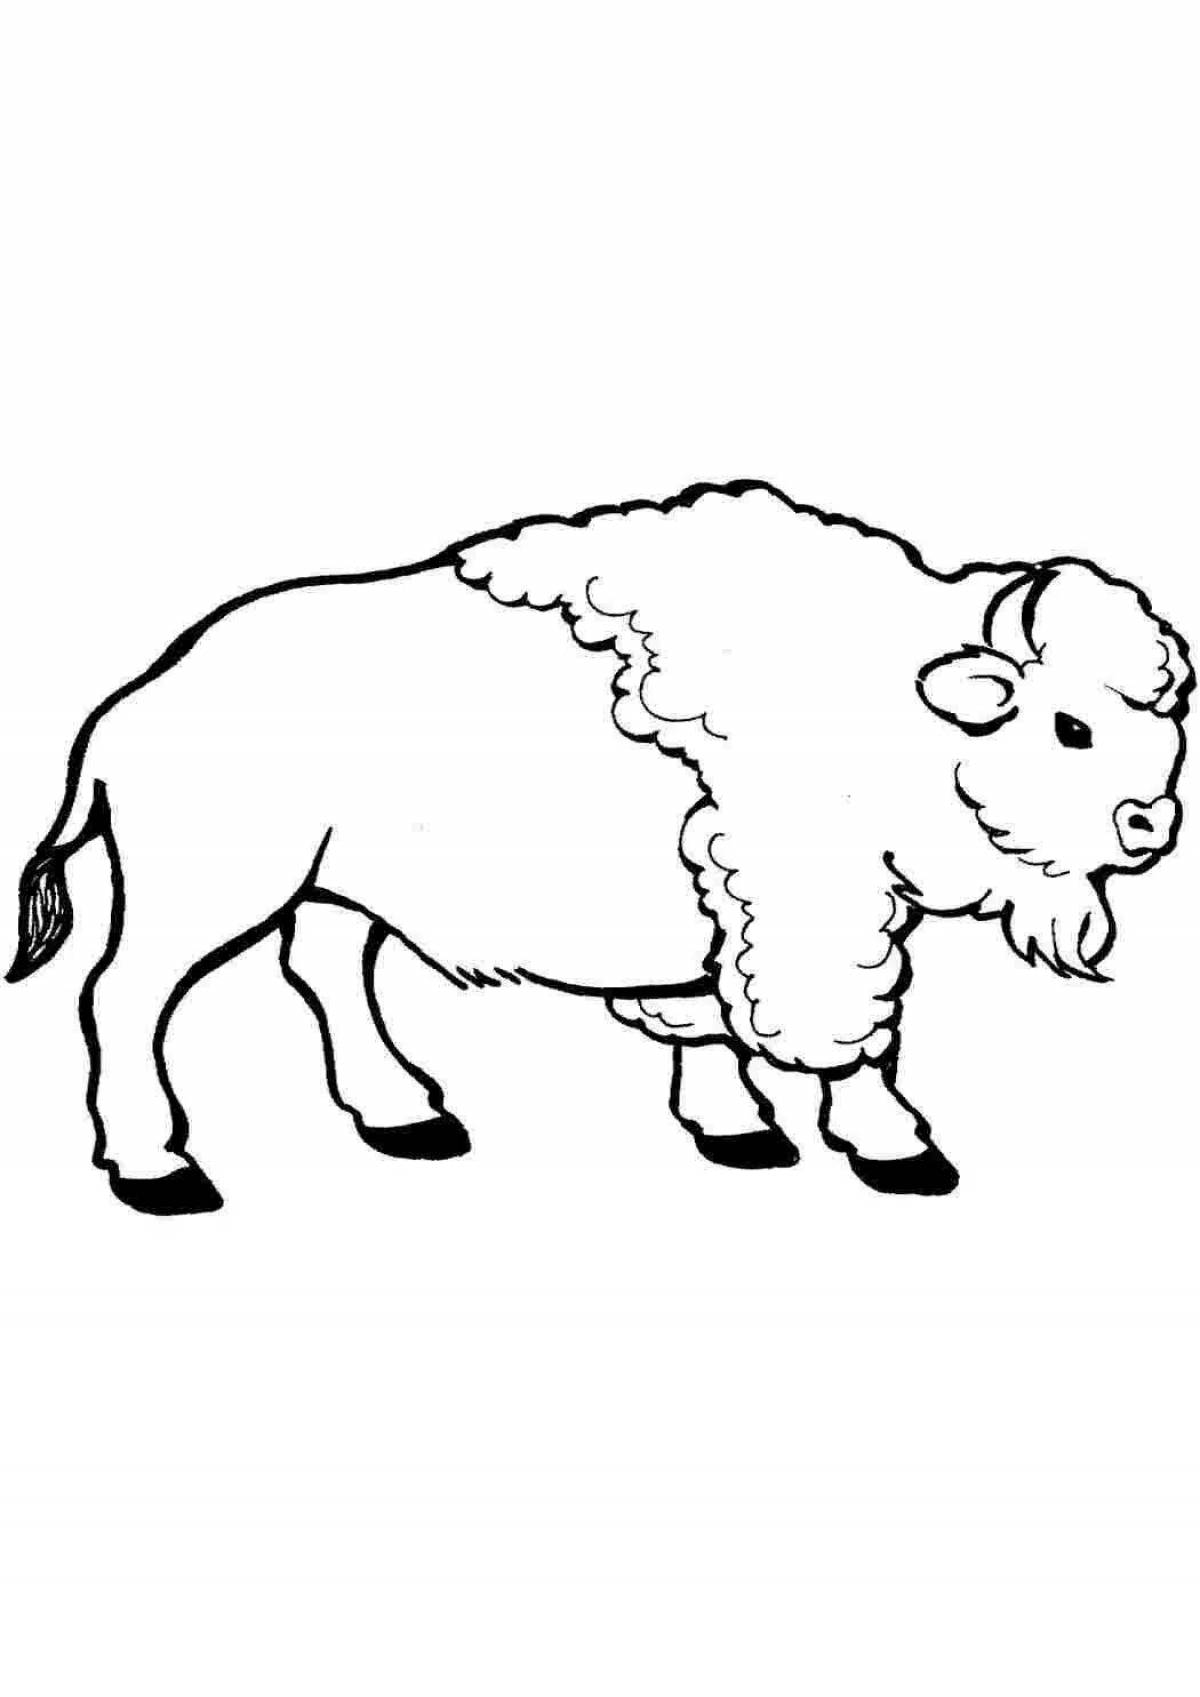 Majestic bison figurine coloring page